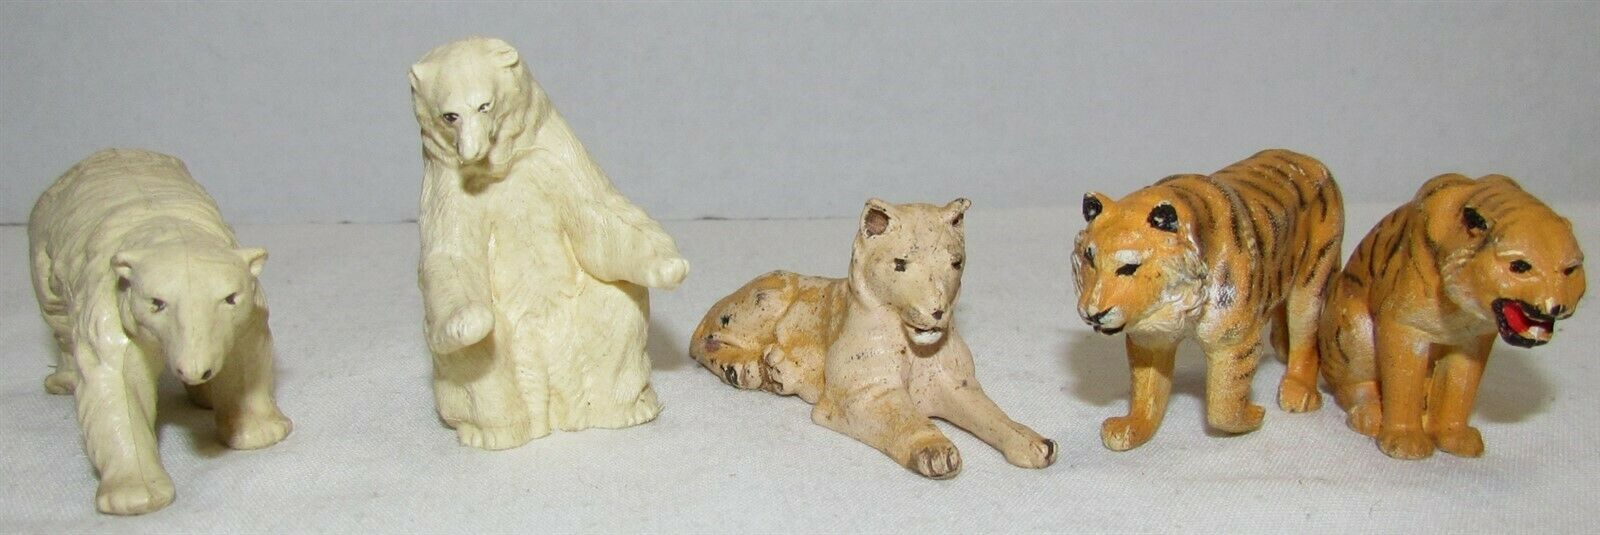 Britains Zoo Figures, lot of 5, polar bears & tigers